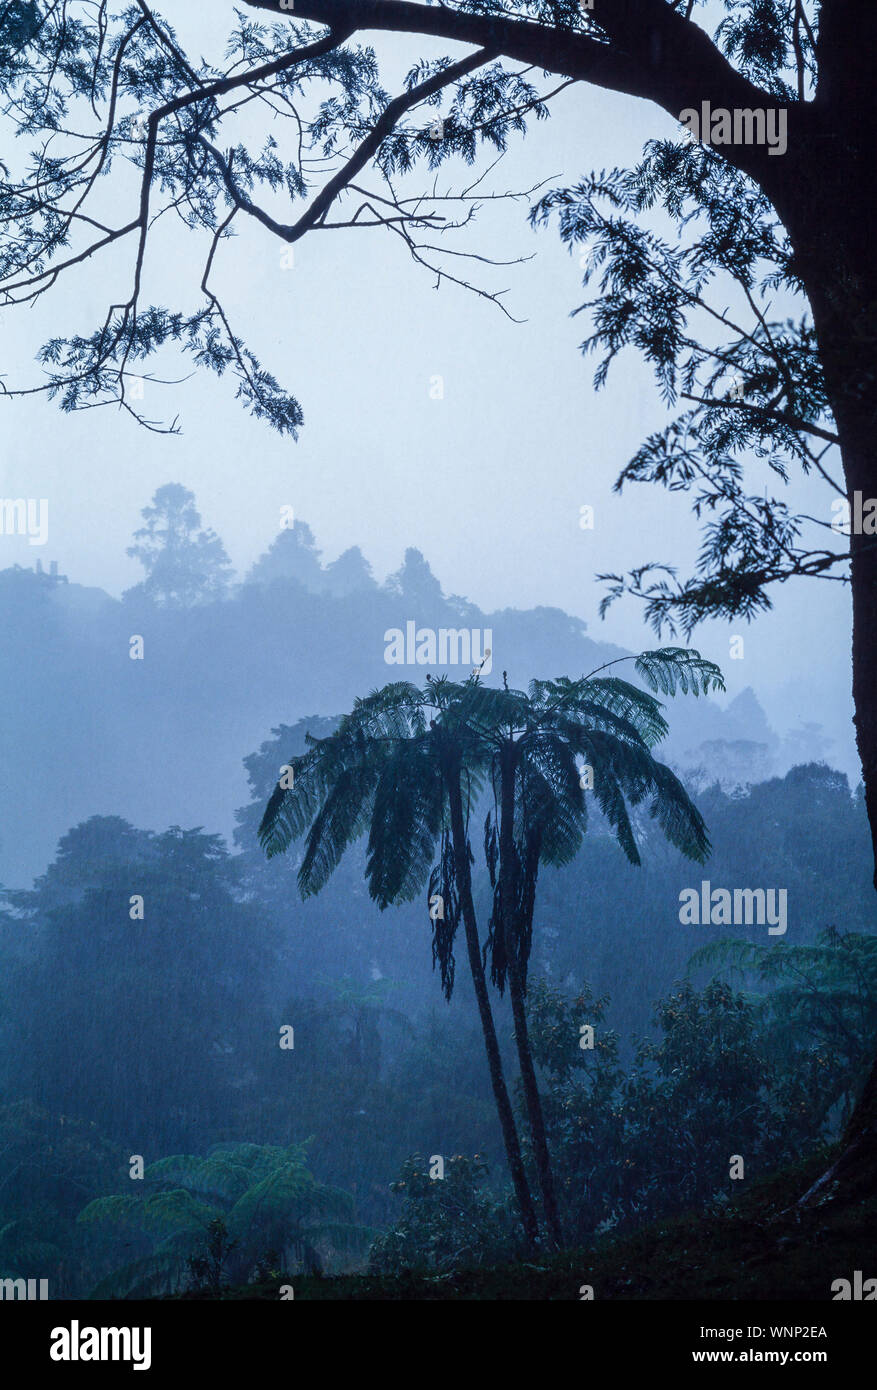 Tropical monsoon downpour, tree fern silhouette, misty forest, Malaysia Stock Photo